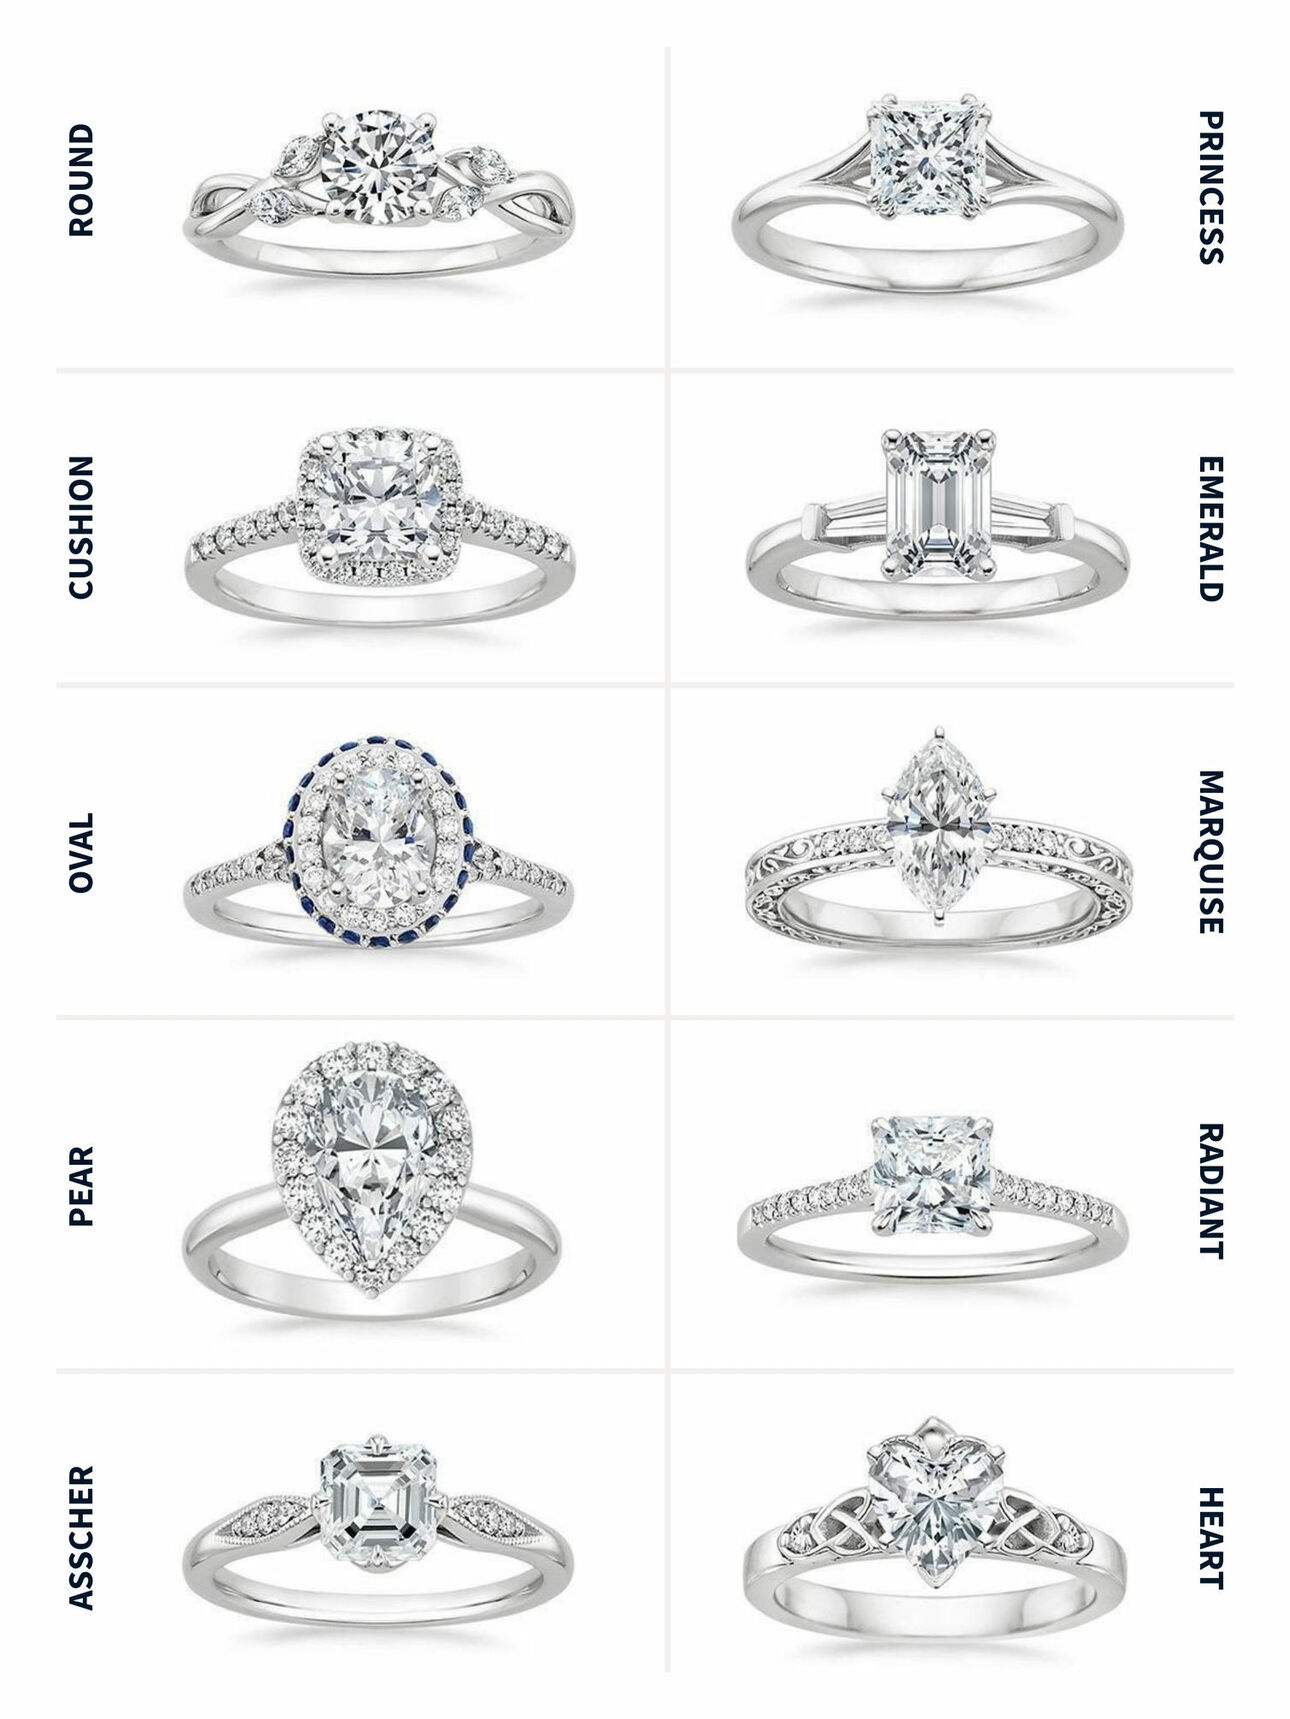 How To Buy An Engagement Ring In 2020 [in Depth Guide]